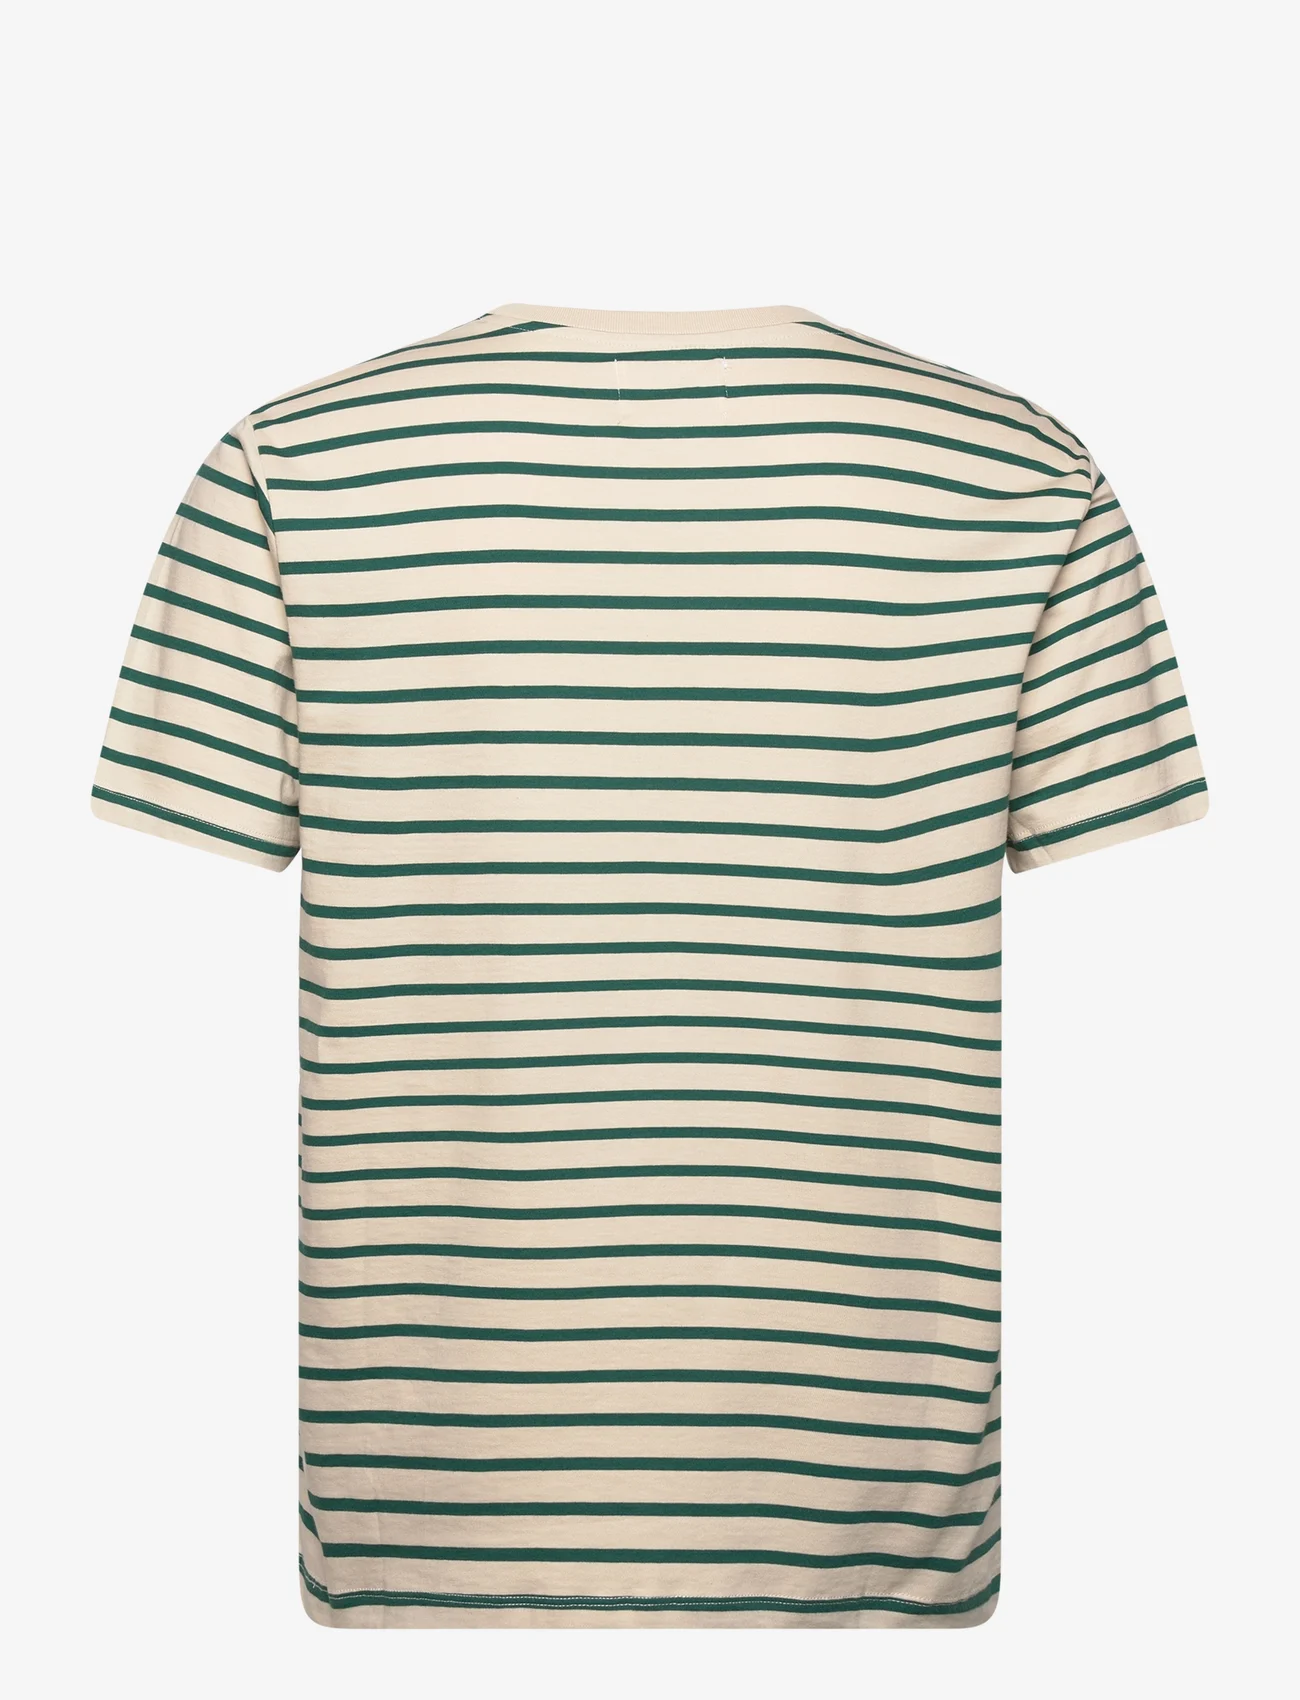 Double A by Wood Wood - Ace badge T-shirt - t-shirts & tops - foggy striped - 1